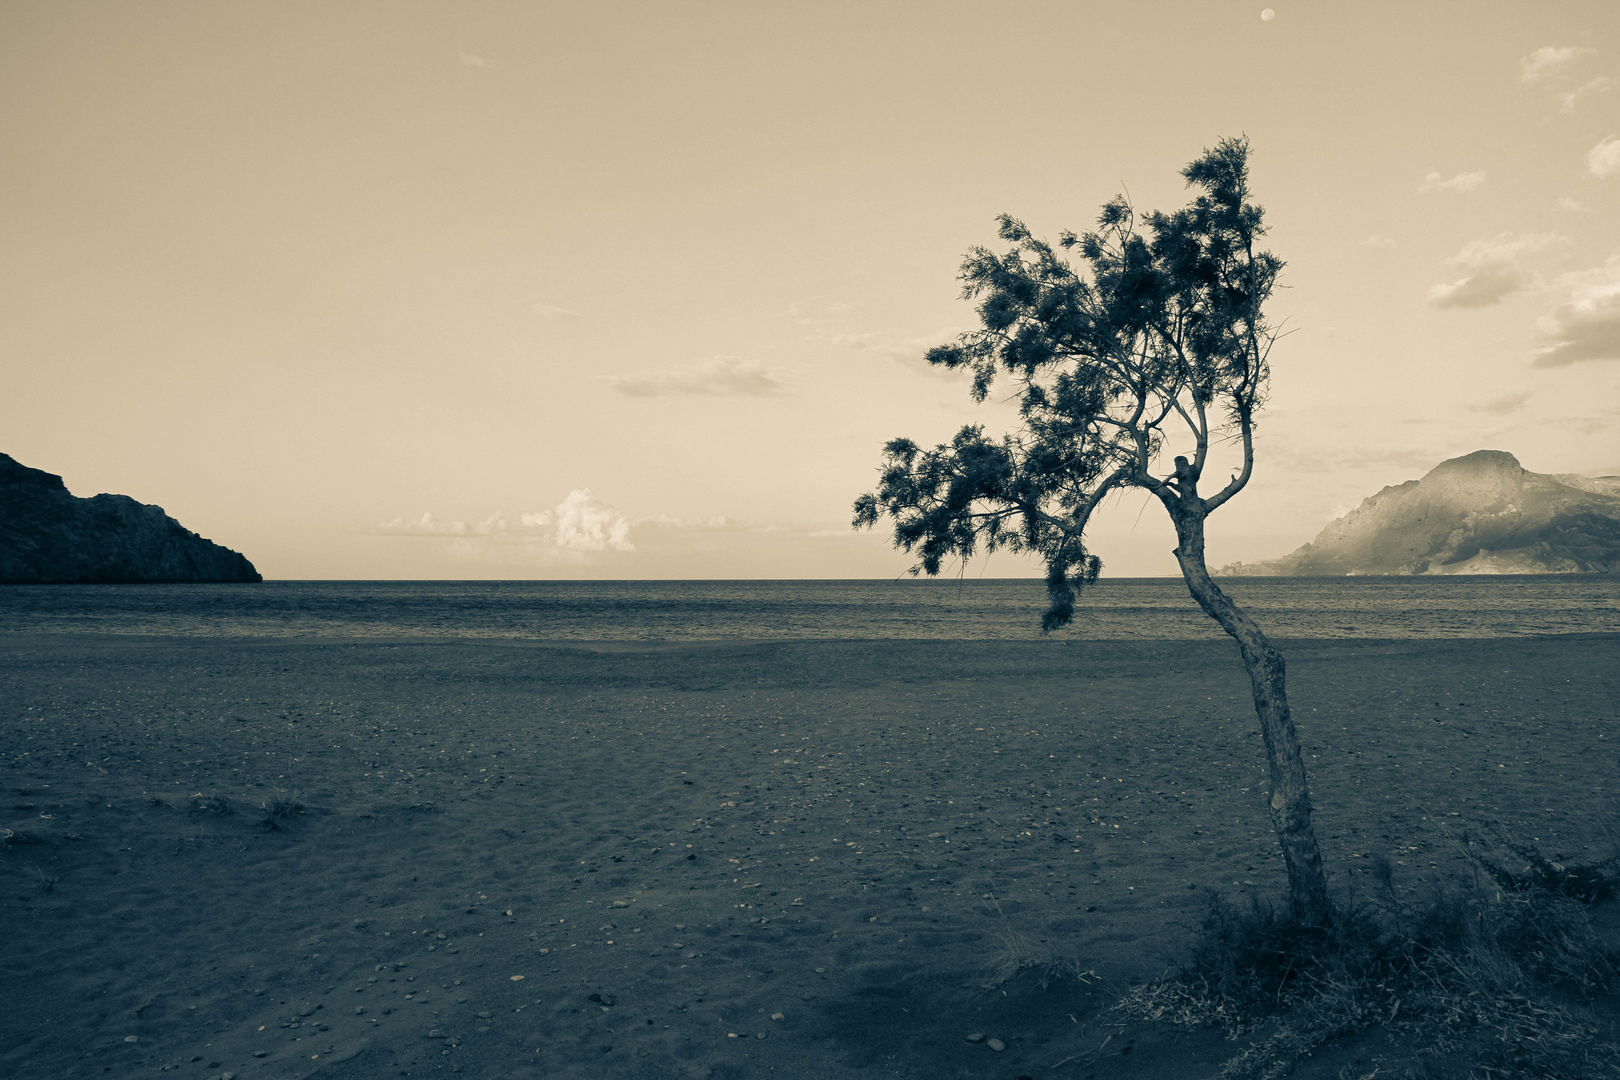 Lonely Tree by the Sea